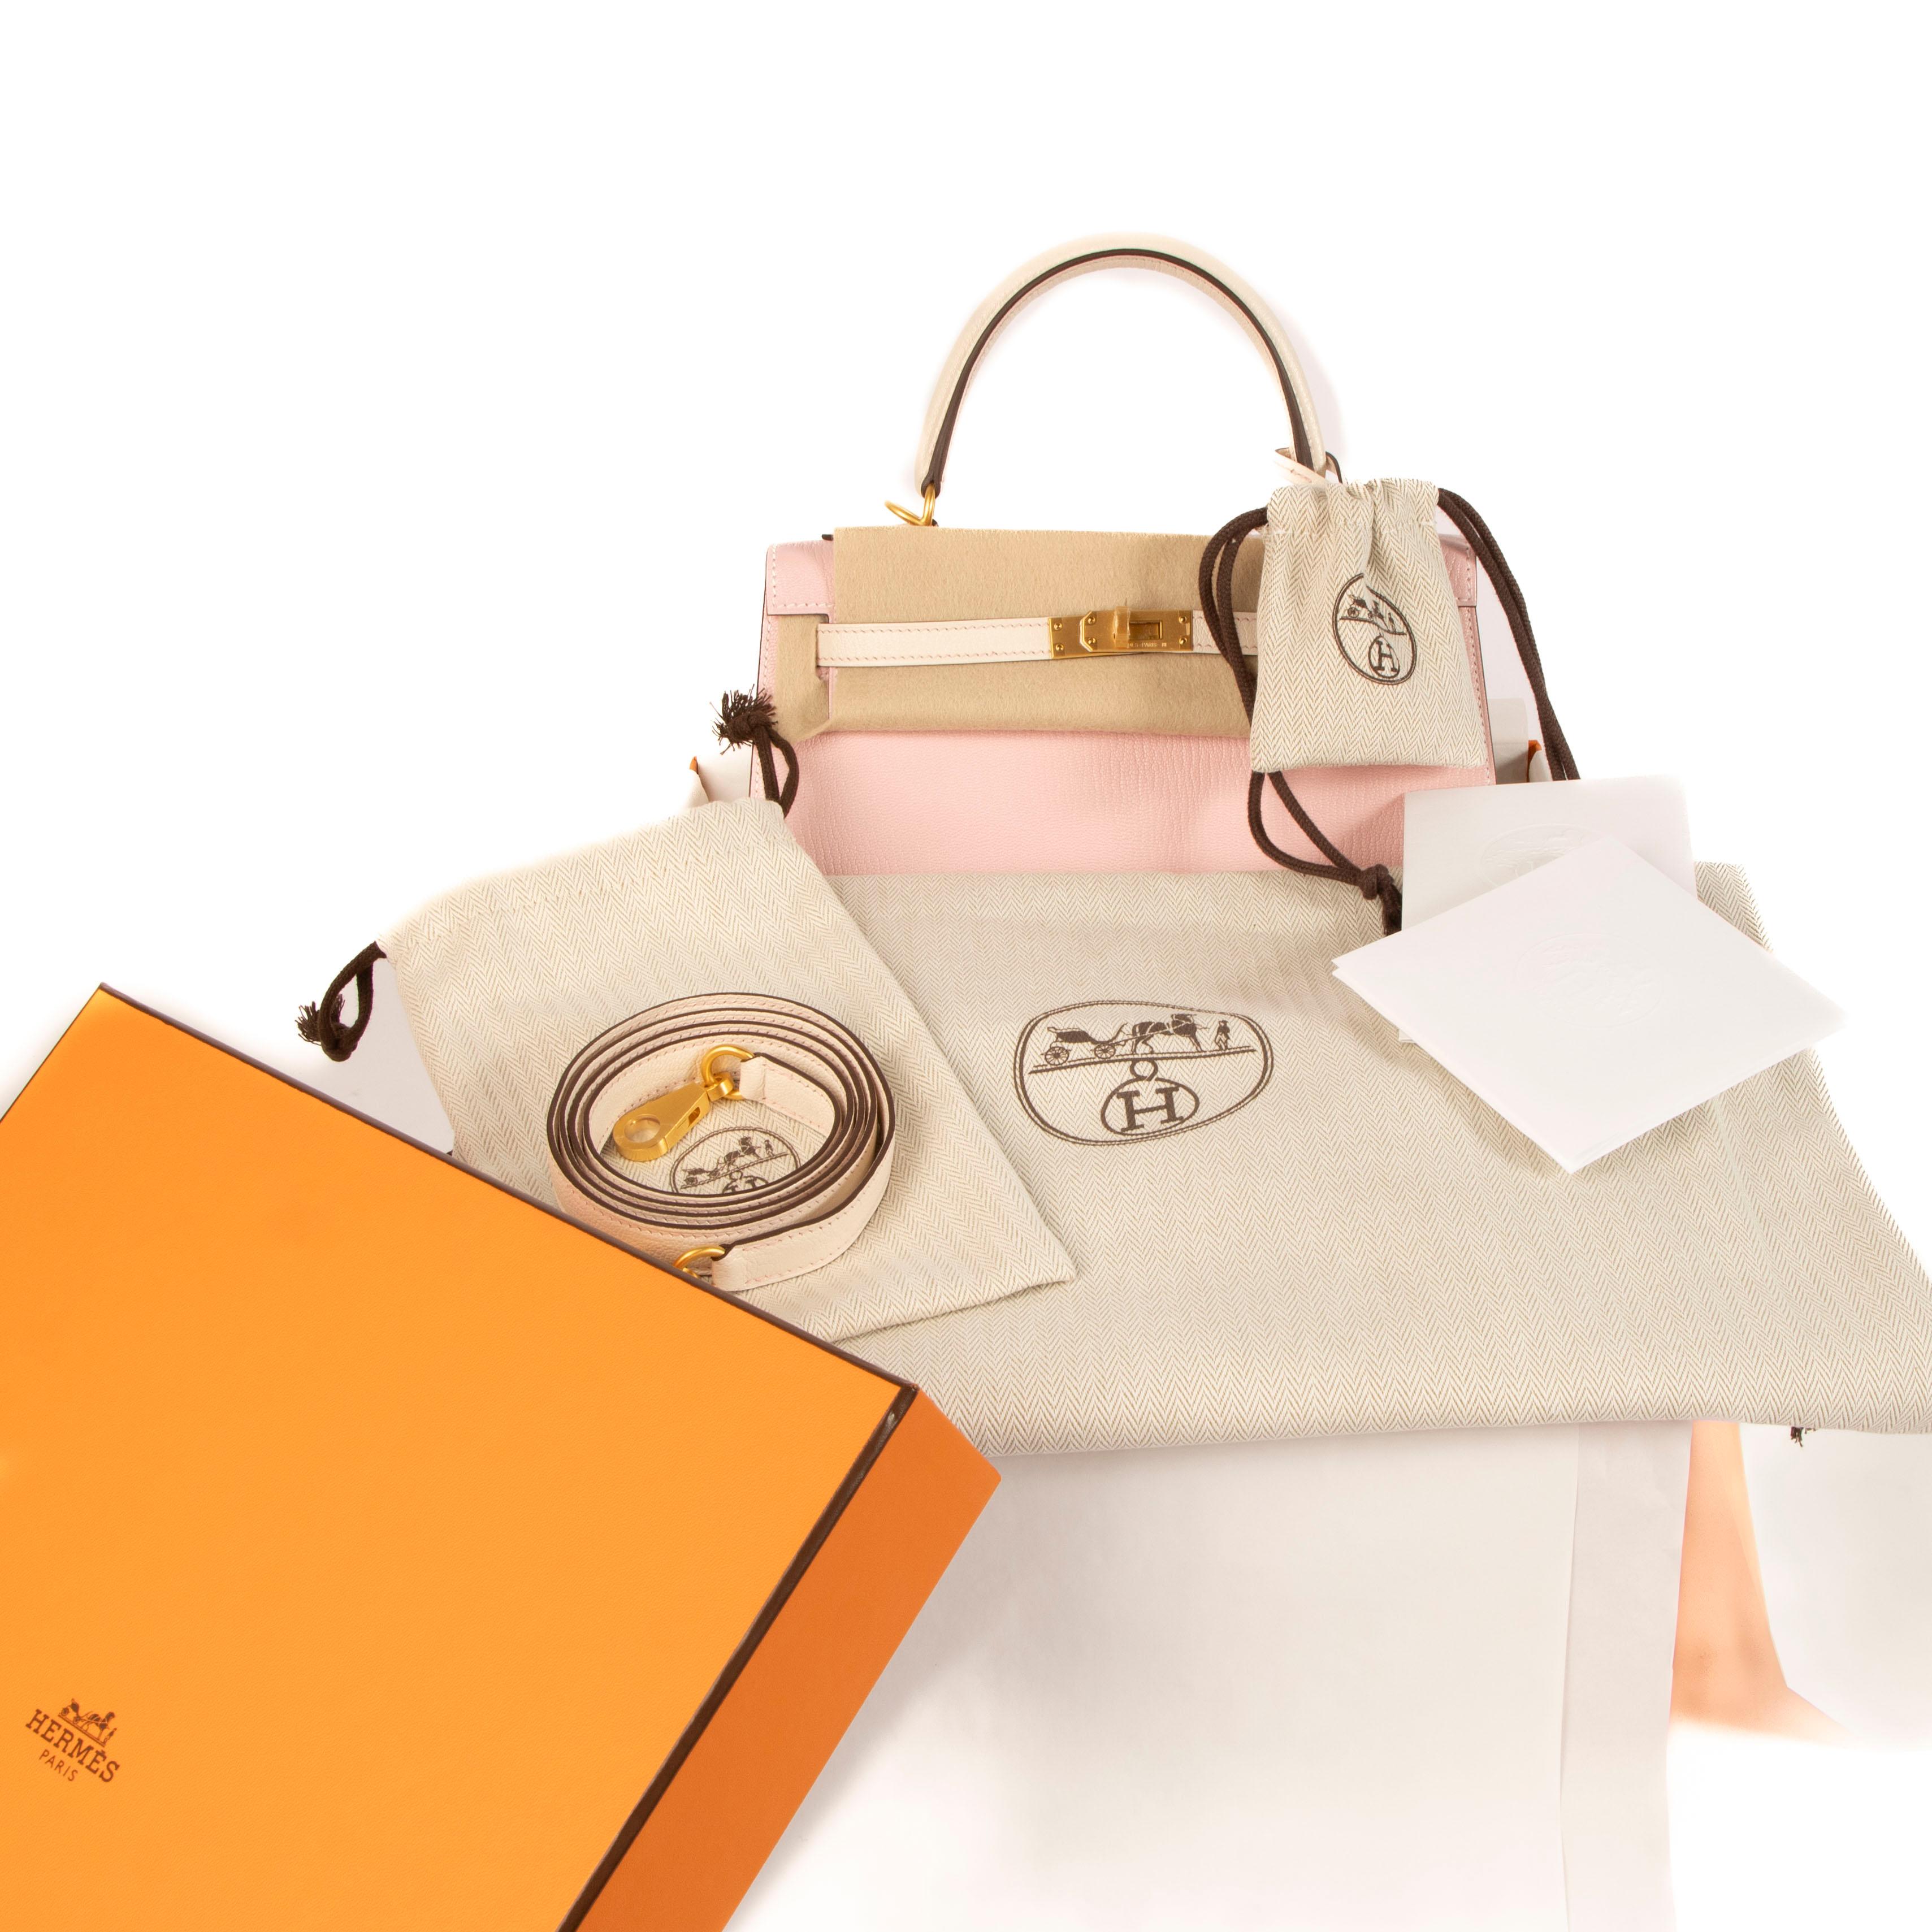 This dainty and feminine Hermès Kelly 25 has the prestigious horseshoe stamp which means the bag is a special order. With the unique combination of two soft Hermès shades Rose Sakura and Nata in Chèvre Mysore goatskin, the bag has customized brushed